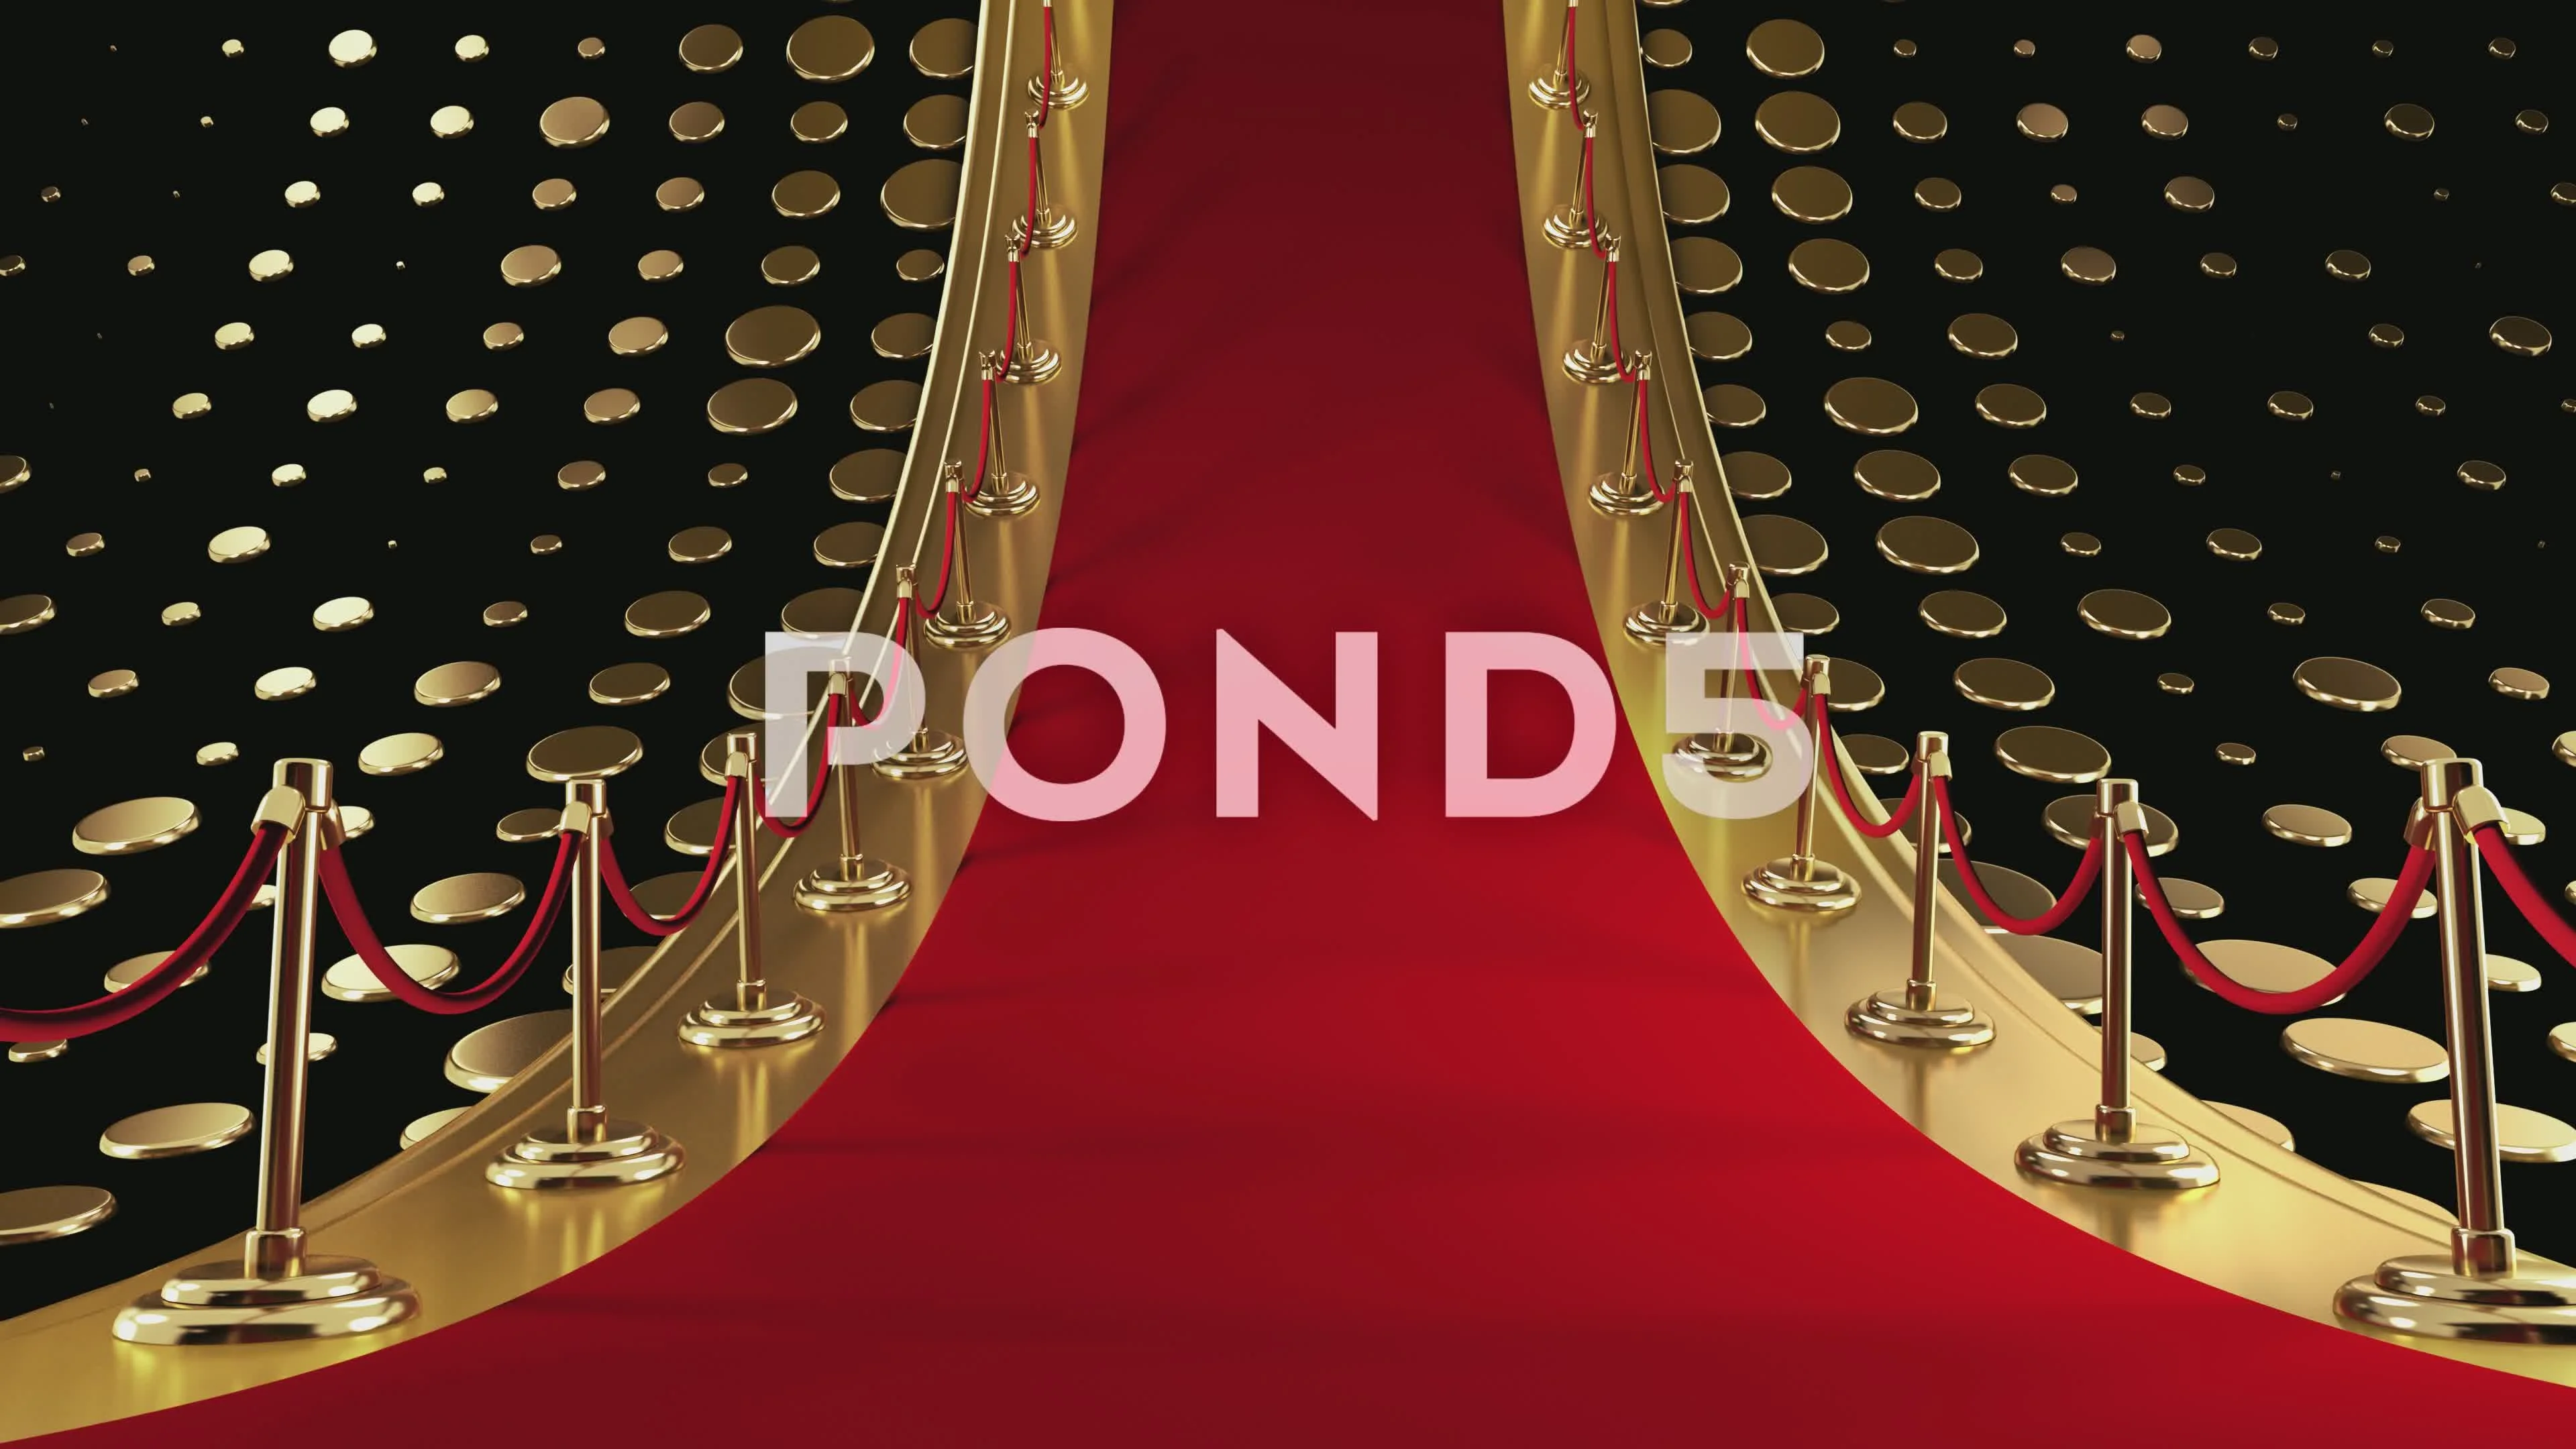 Awards Show Background Loop | Stock Video | Pond5